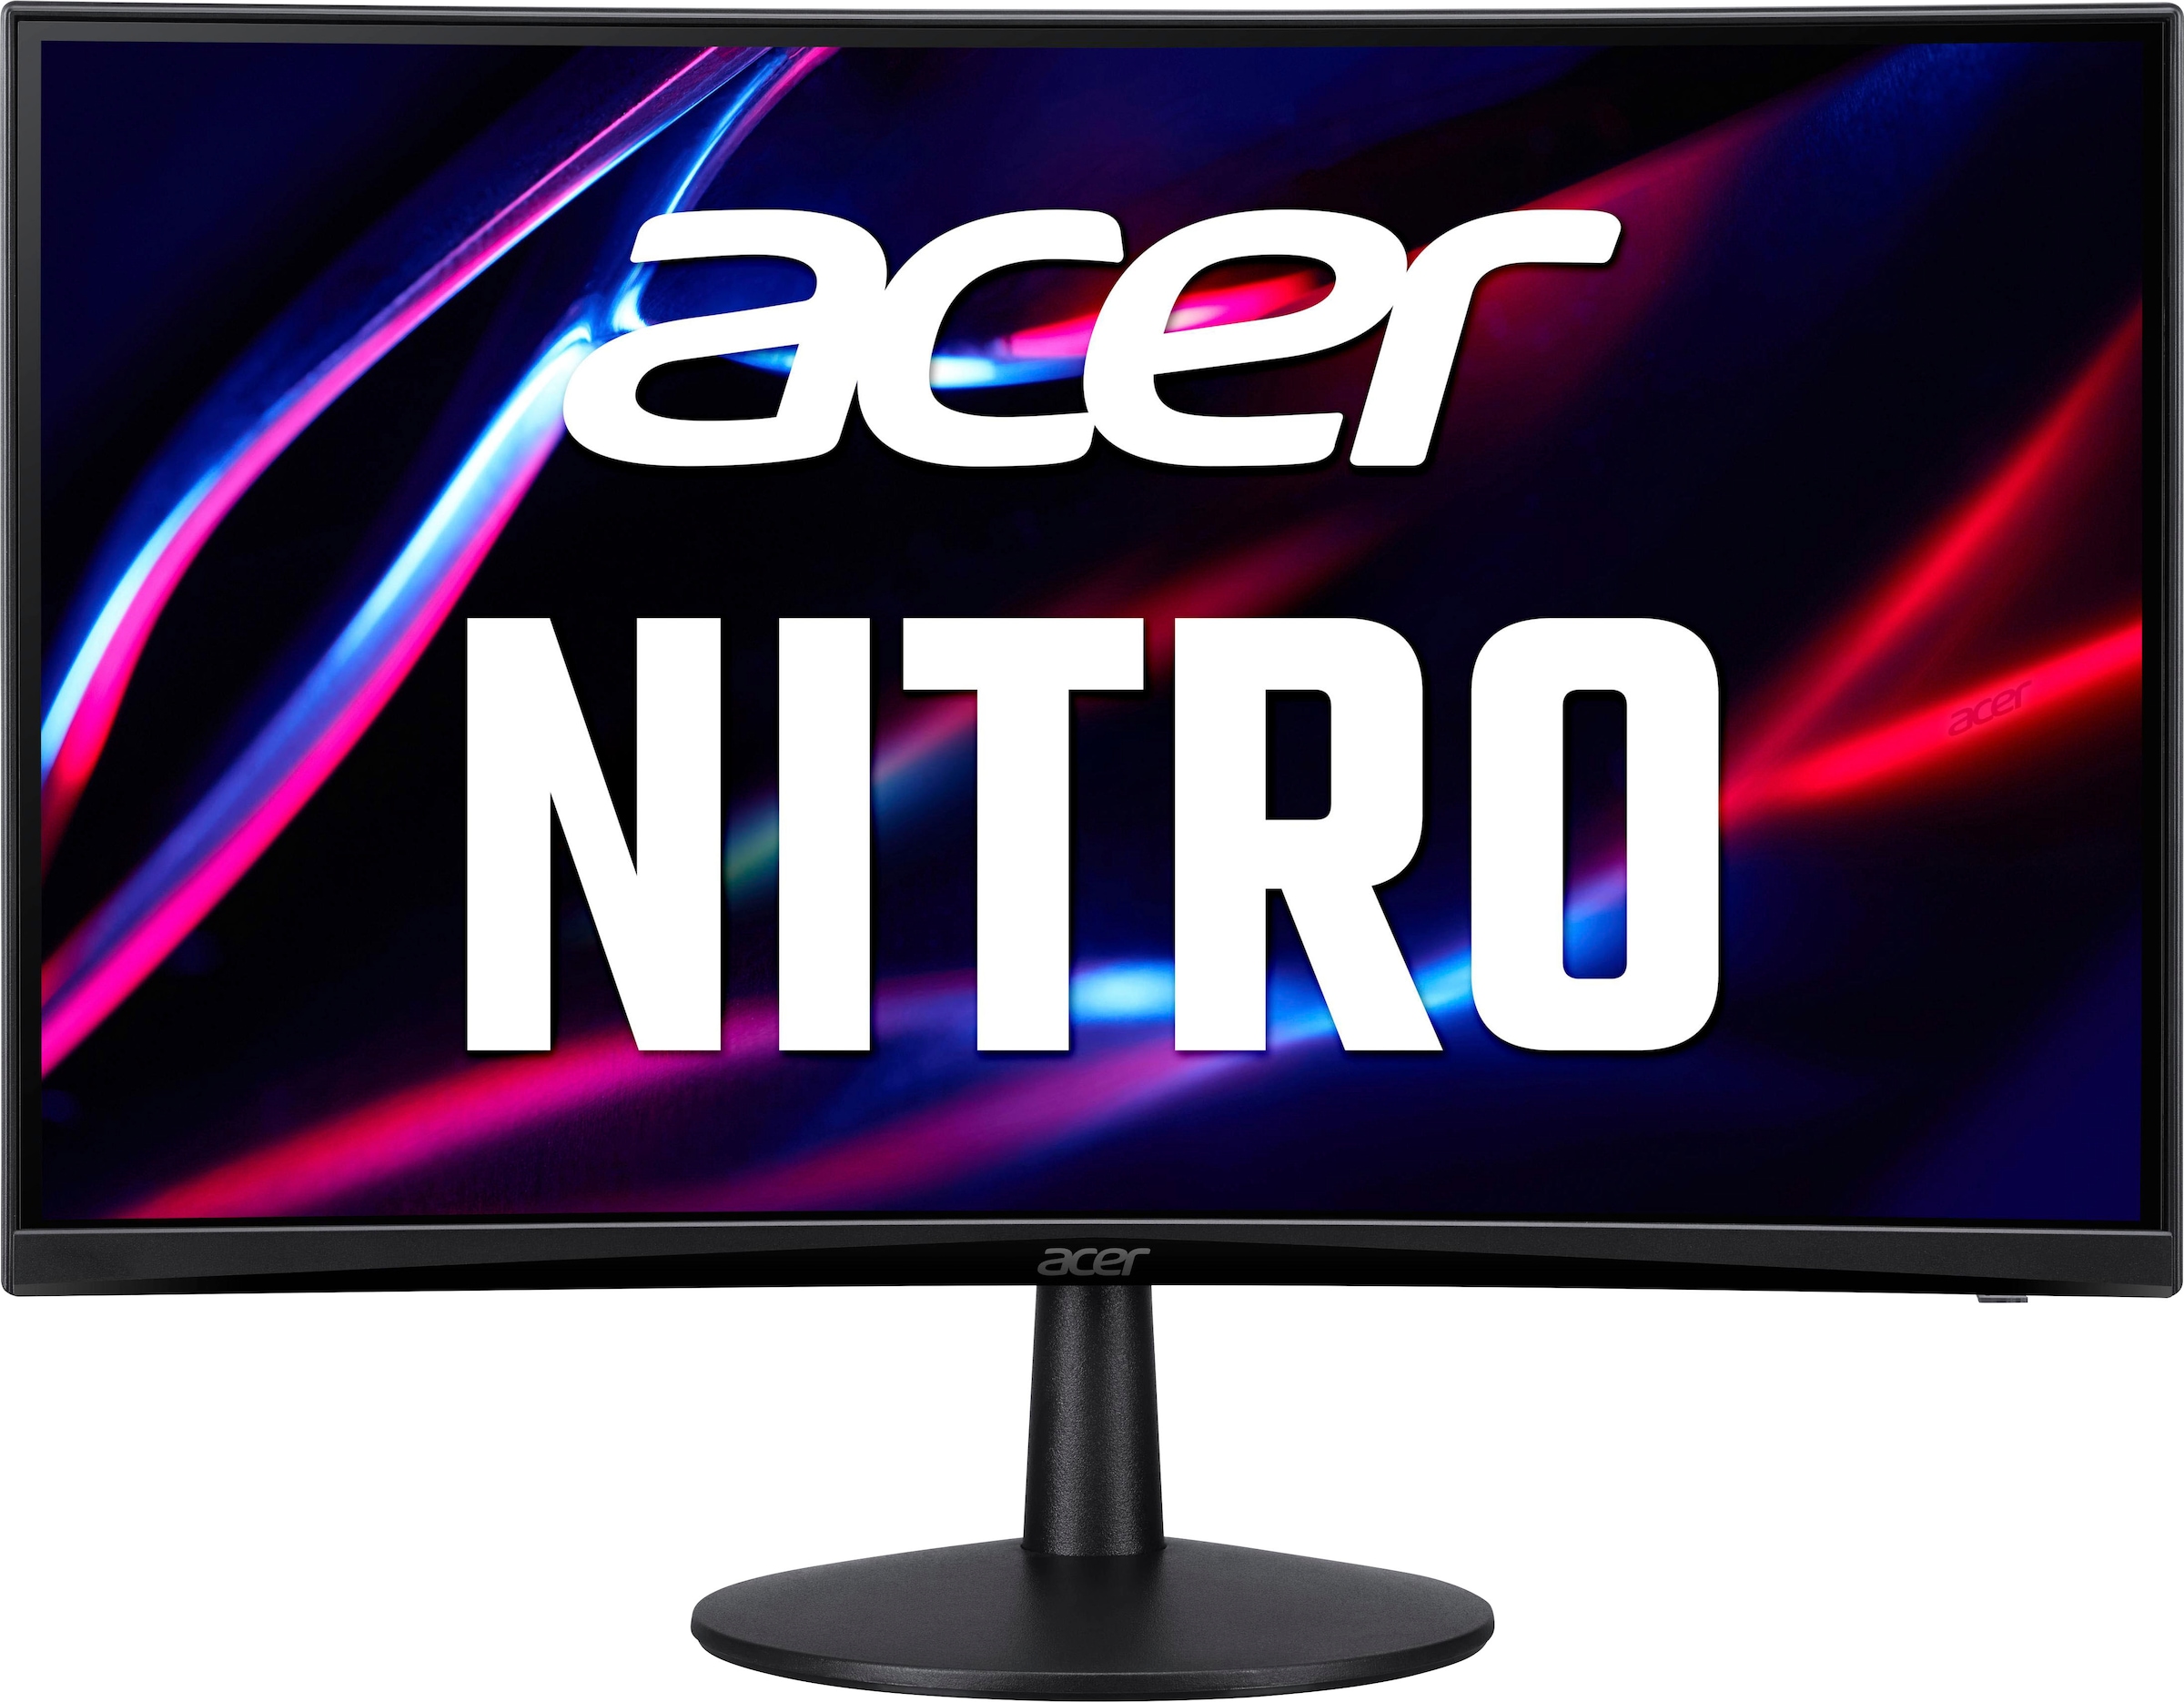 Acer Curved-Gaming-LED-Monitor »Nitro ED240Q S«, 59,9 cm/23,6 Zoll, 1920 x 1080 px, Full HD, 1 ms Reaktionszeit, 180 Hz